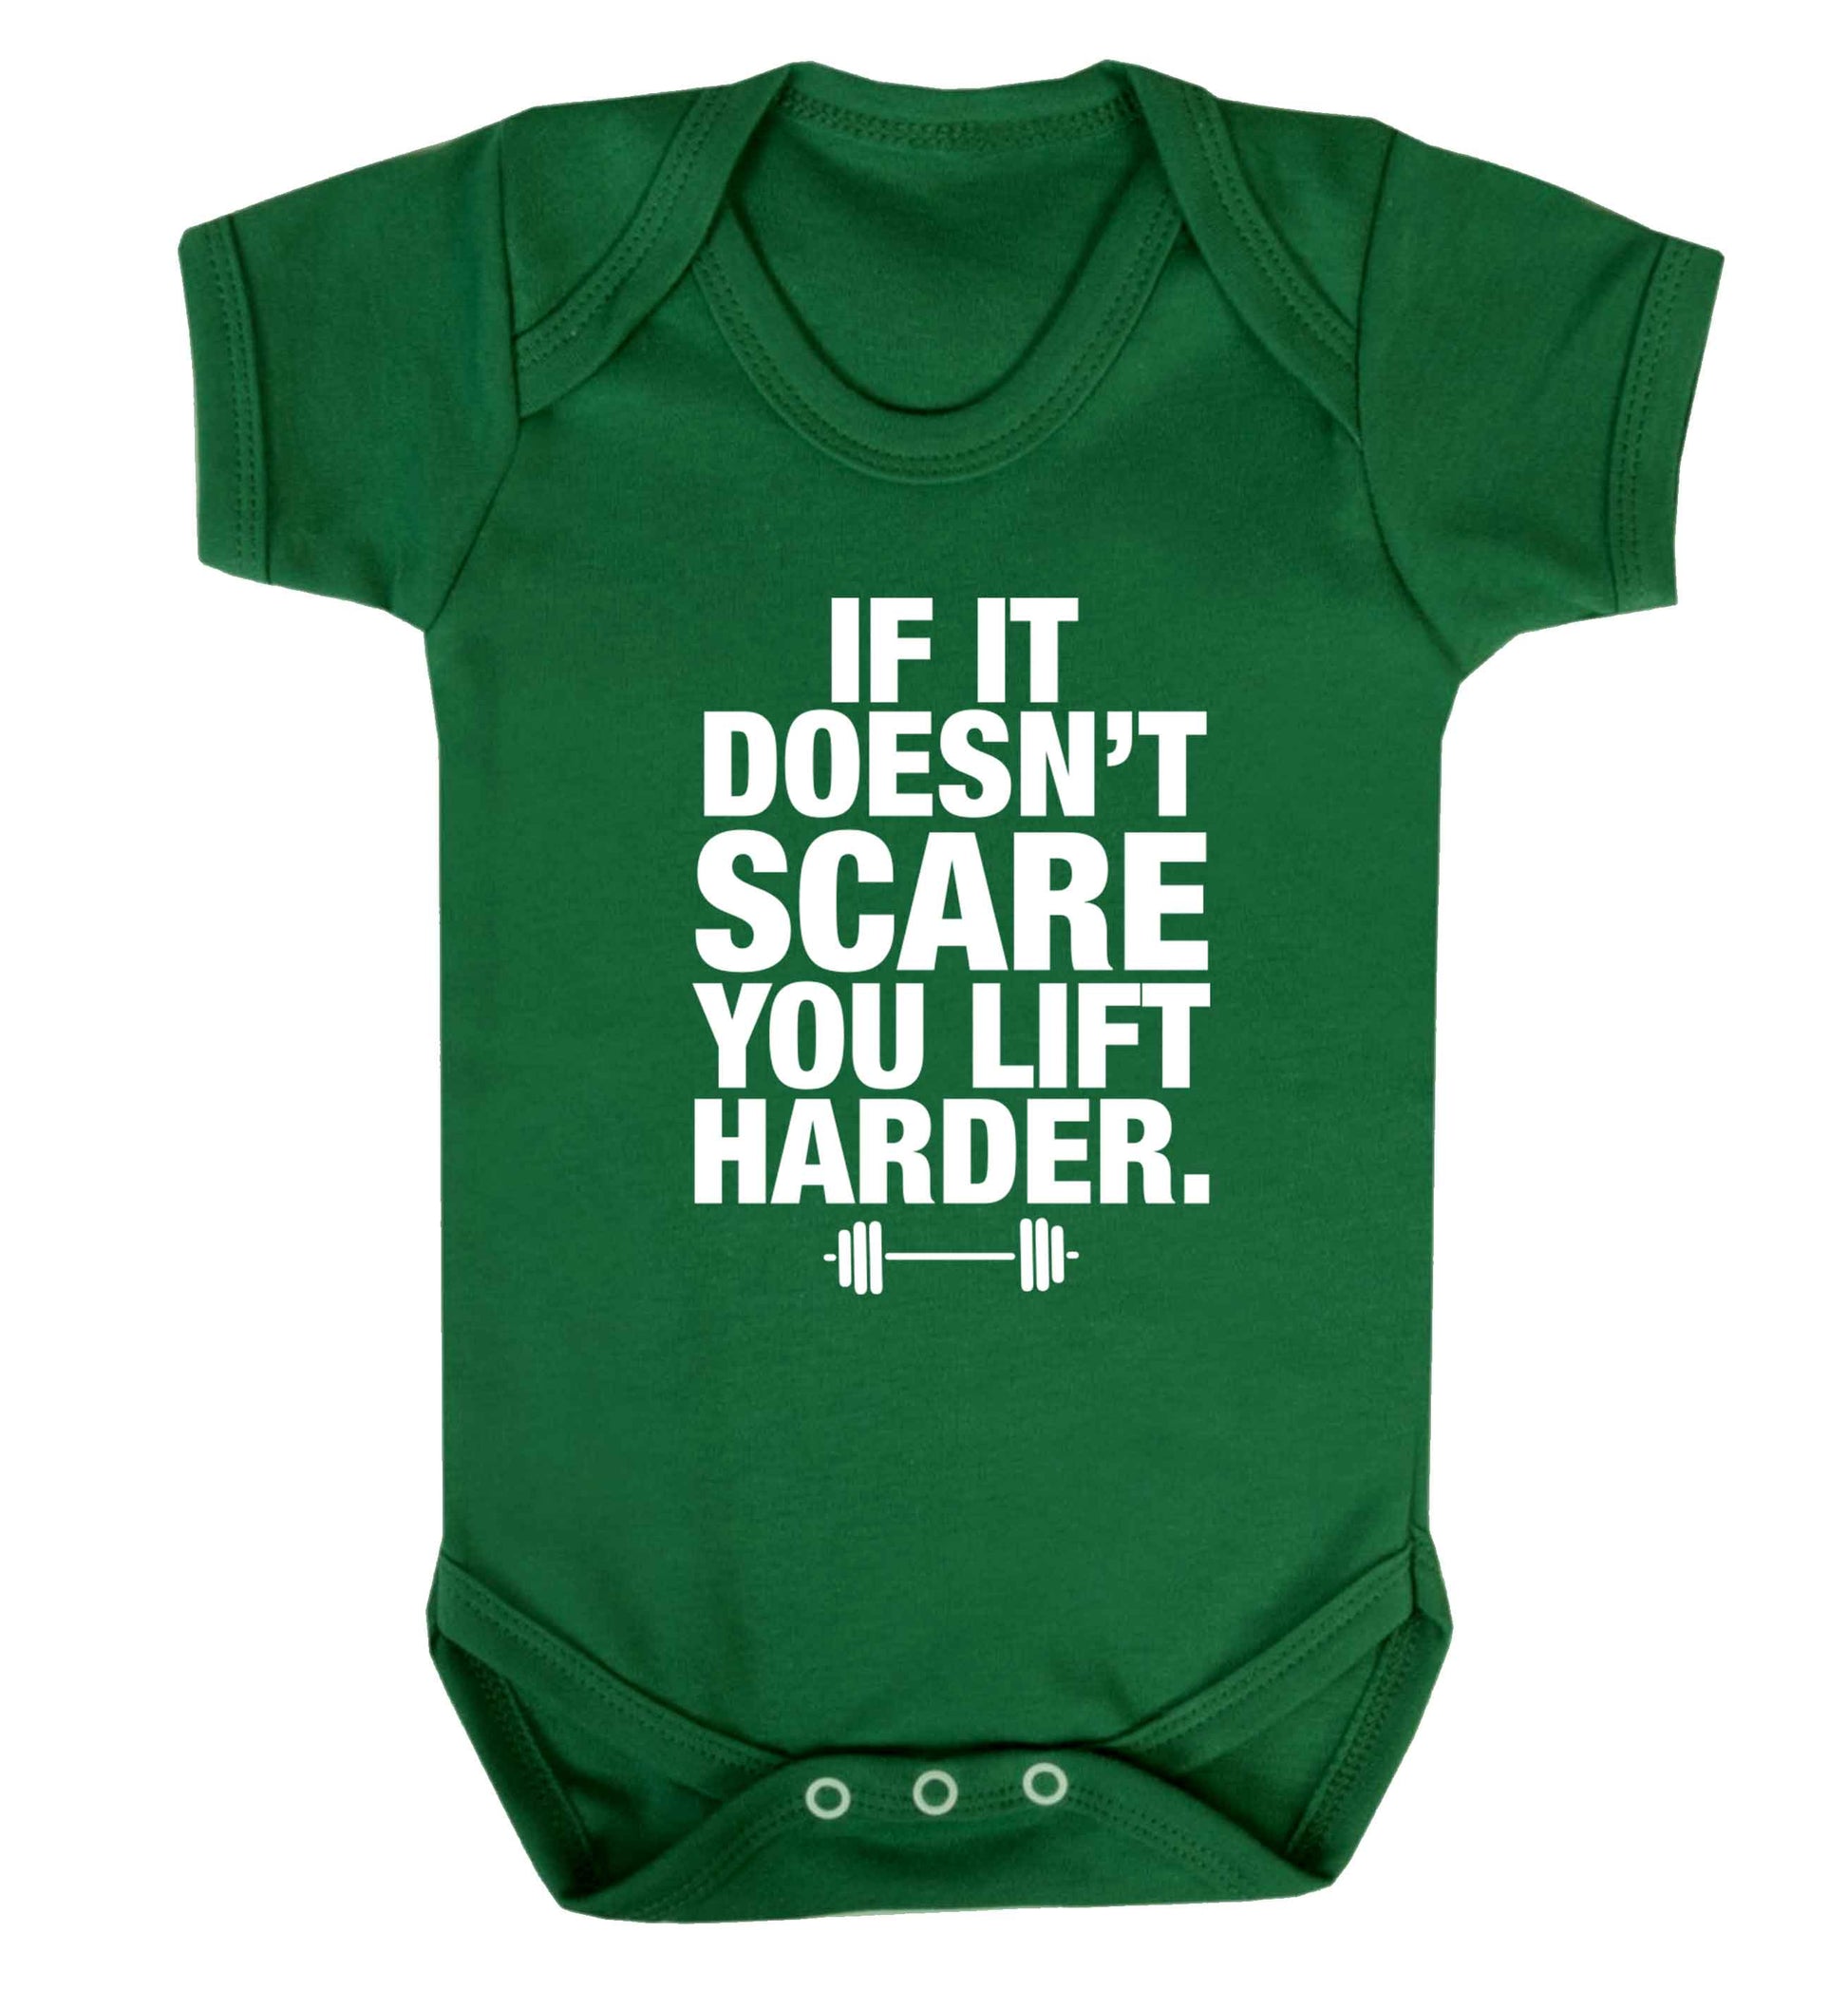 If it doesnt' scare you lift harder Baby Vest green 18-24 months